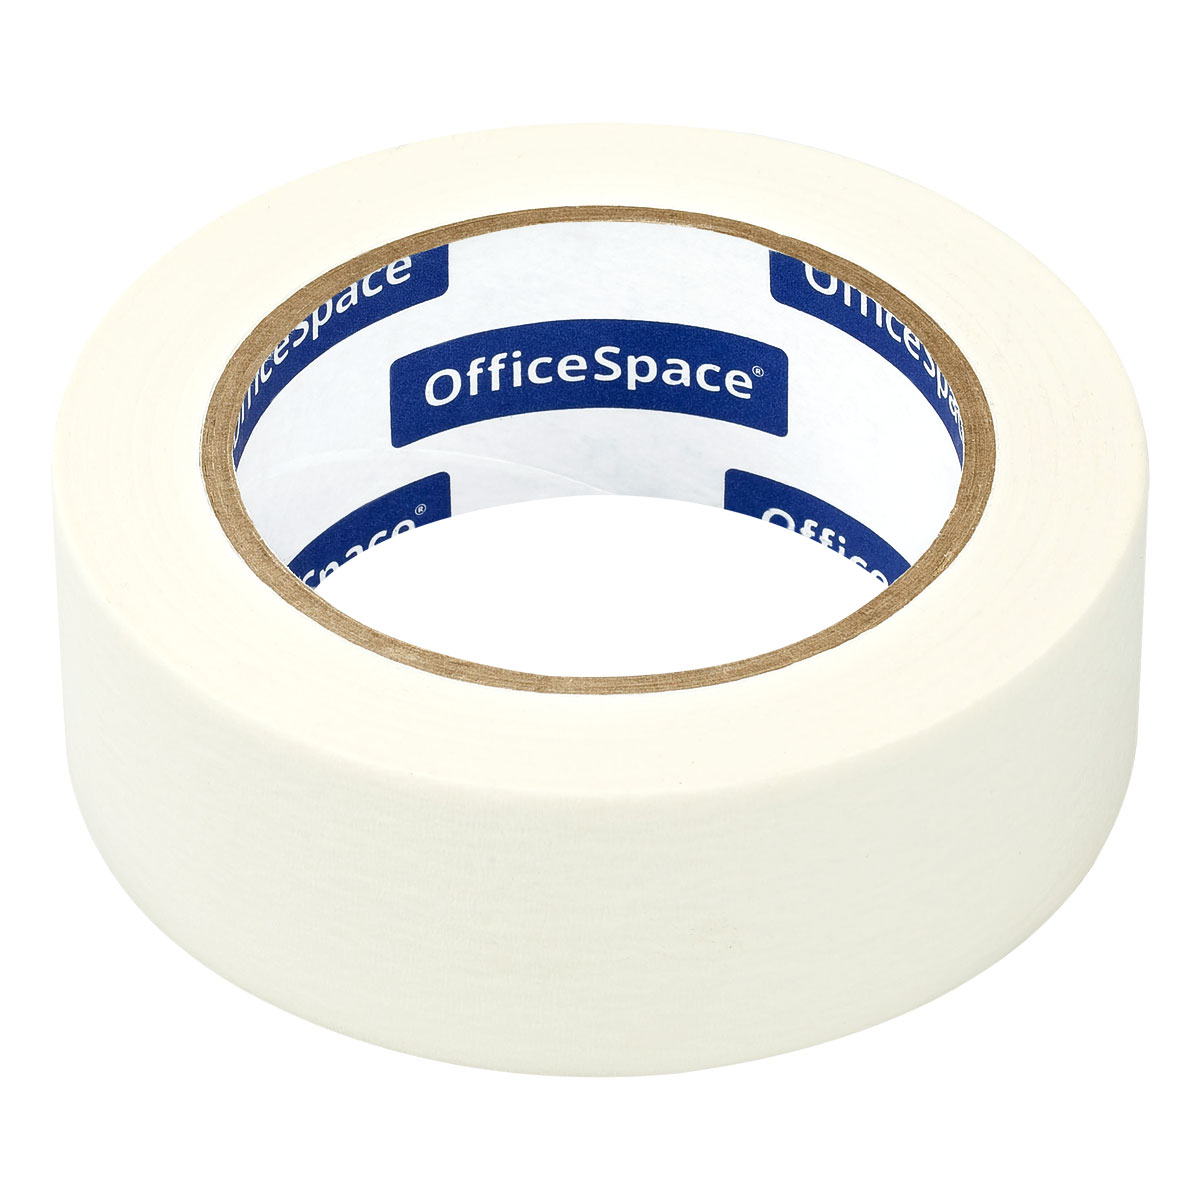    OfficeSpace, 38*50,  